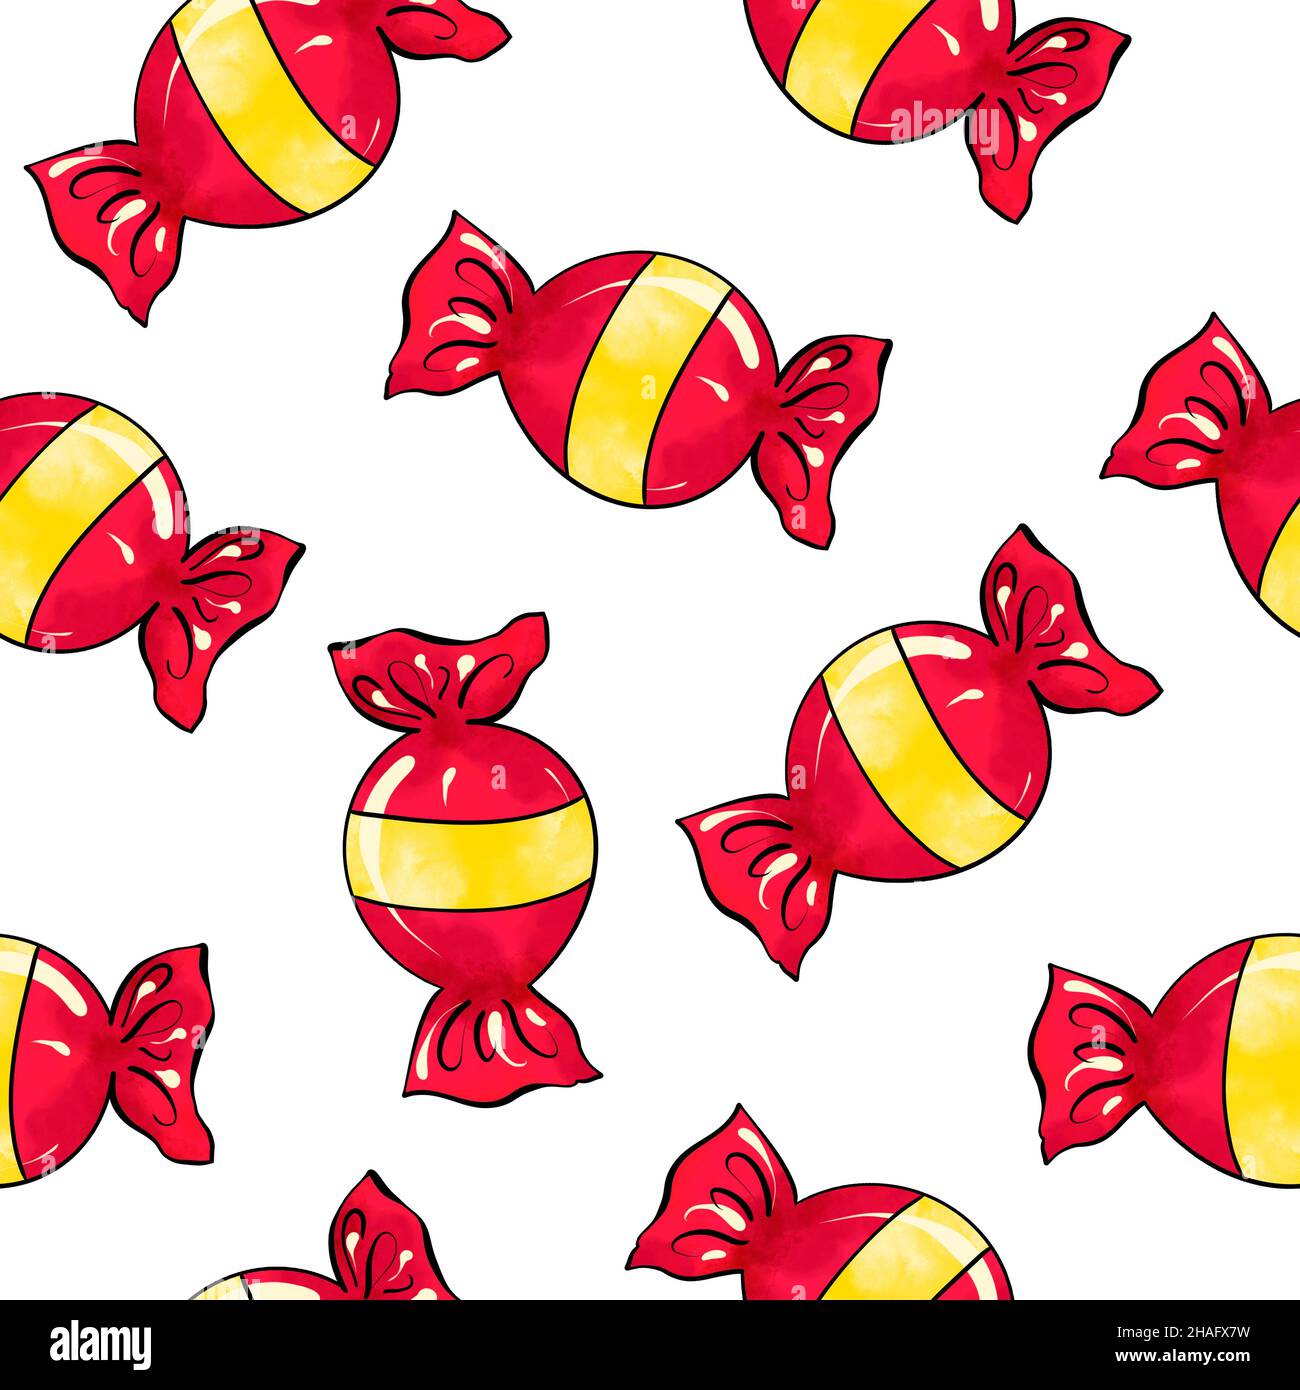 Seamless raster pattern of candy wrapped in red color with yellow stripe on white isolated background. High quality illustration Stock Photo